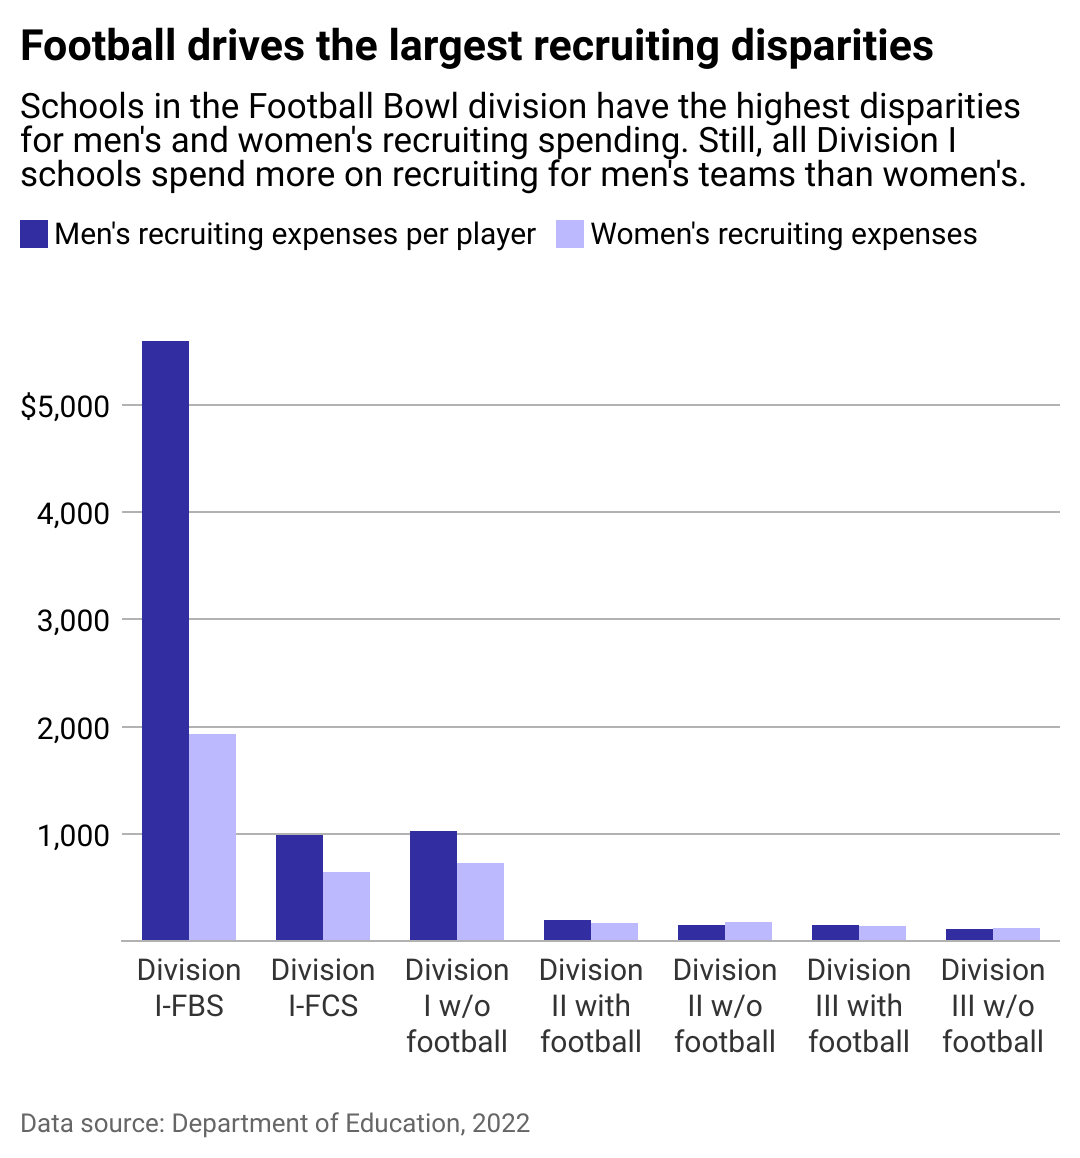 A bar chart showing that football drives the largest recruiting disparities. Schools in the Football Bowl division have the highest disparities for men